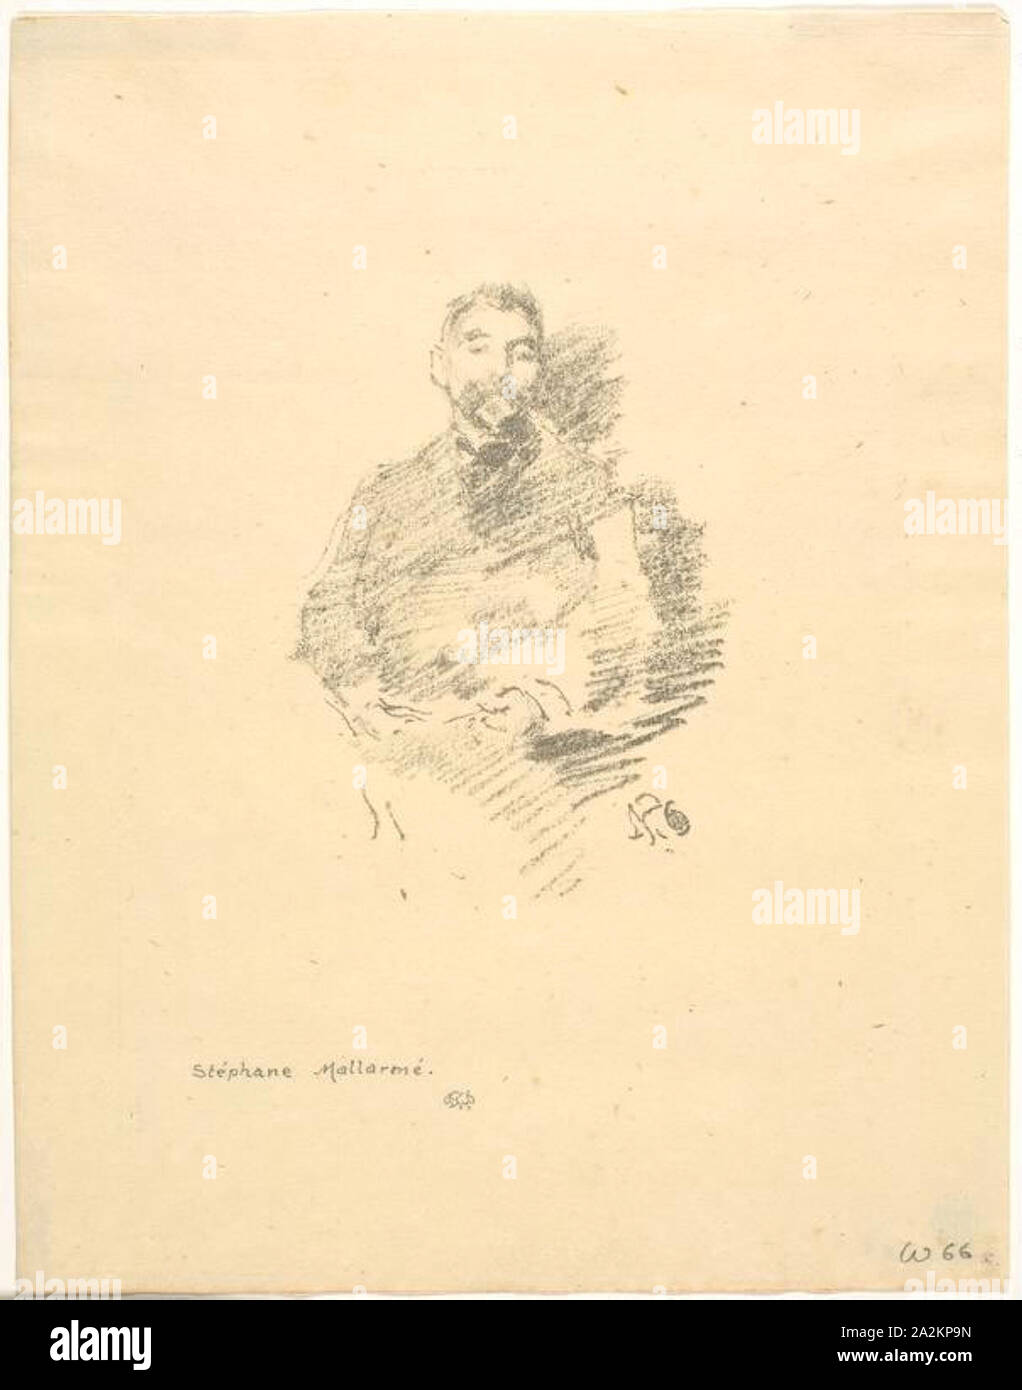 Stéphane Mallarmé, 1892, James McNeill Whistler, American, 1834-1903, United States, Lithograph on cream laid paper, 100 x 73 mm (image), 200 x 155 mm (sheet Stock Photo